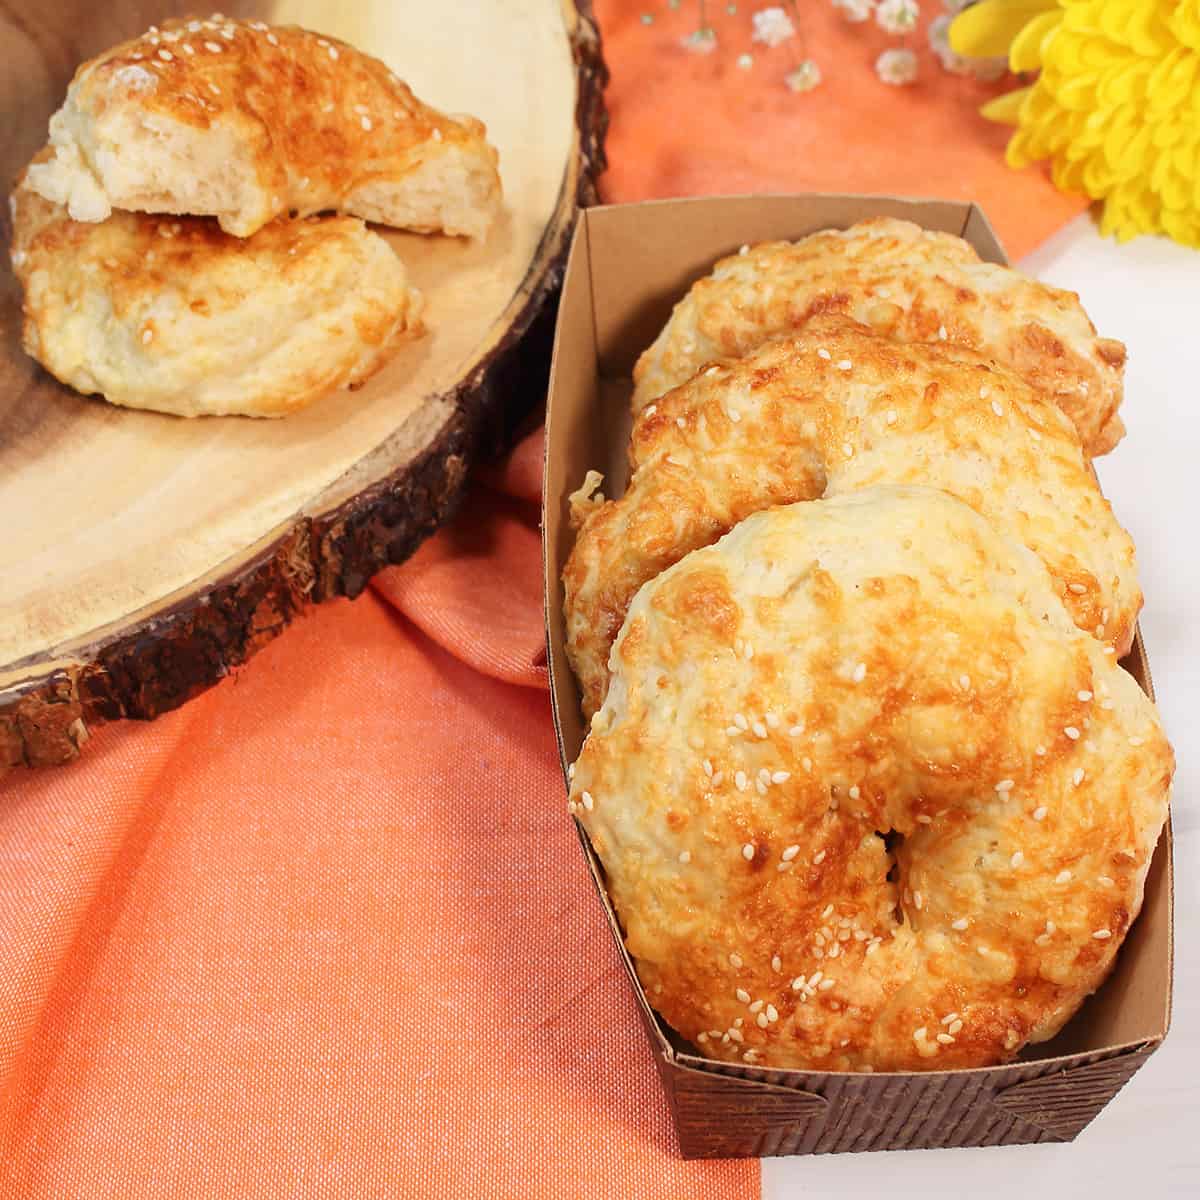 Golden asiago bagels in basket with one cut open.